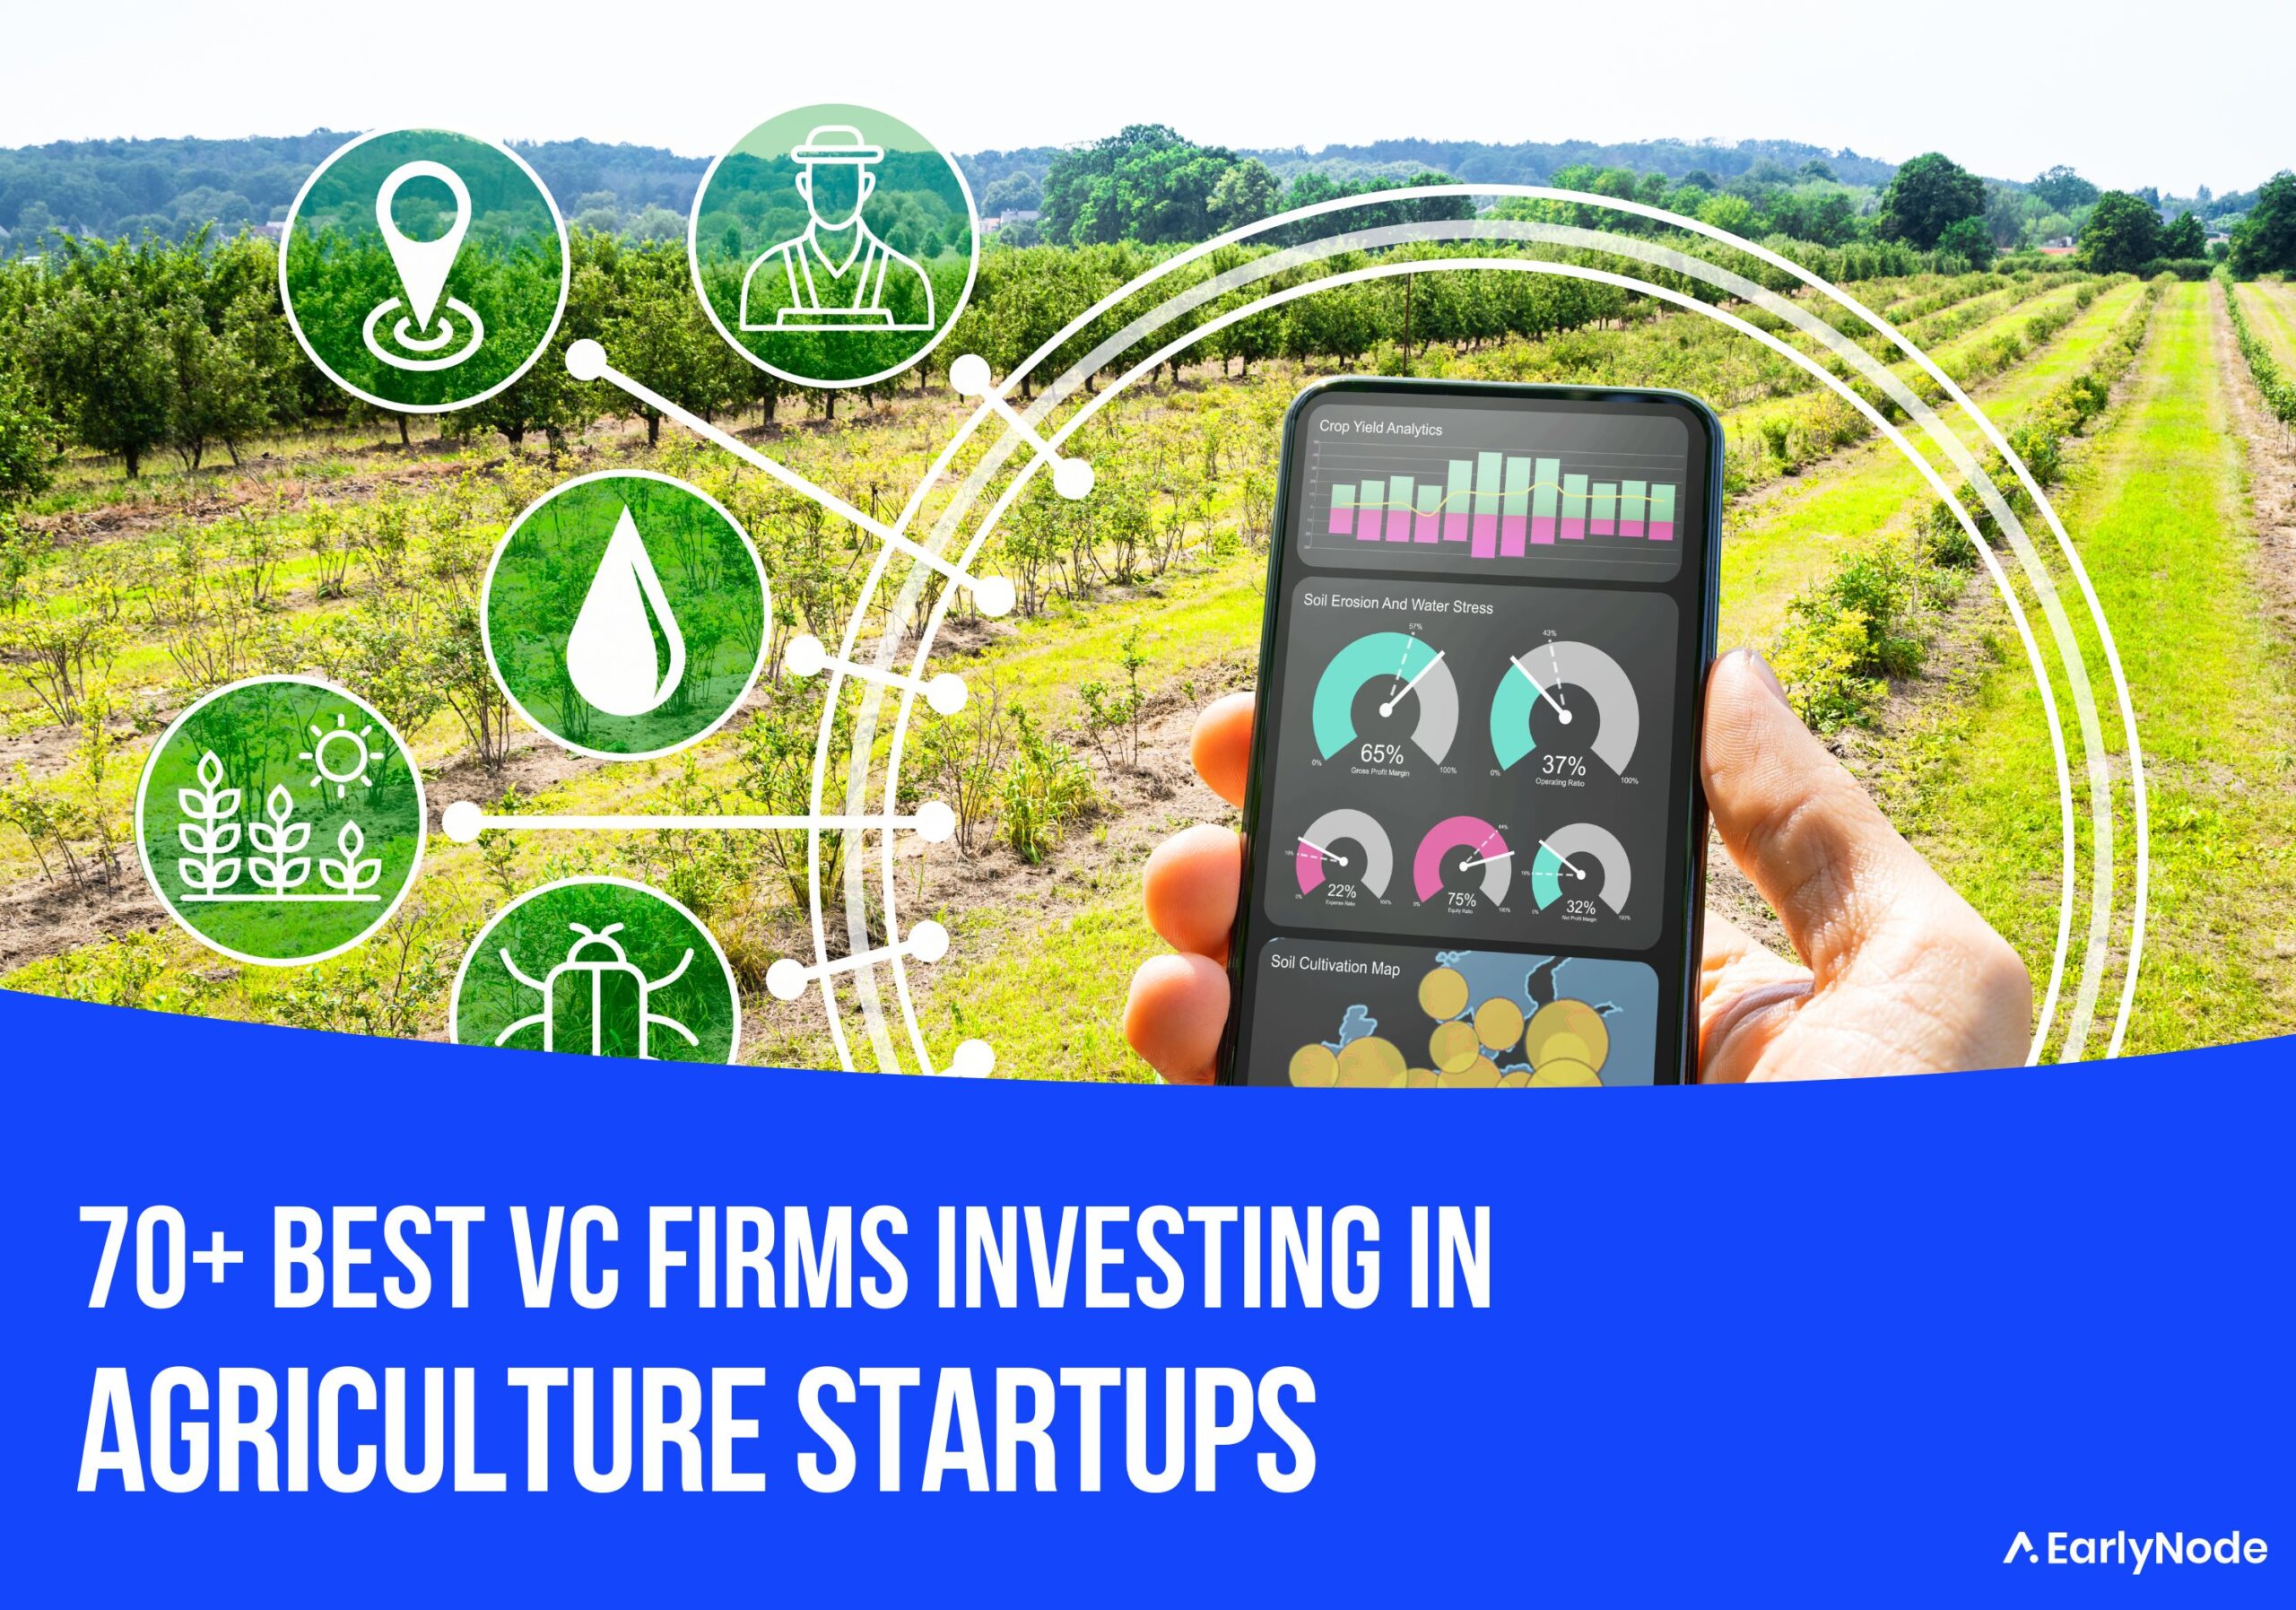 75 Best Venture Capital (VC) Firms Investing in Agriculture Startups